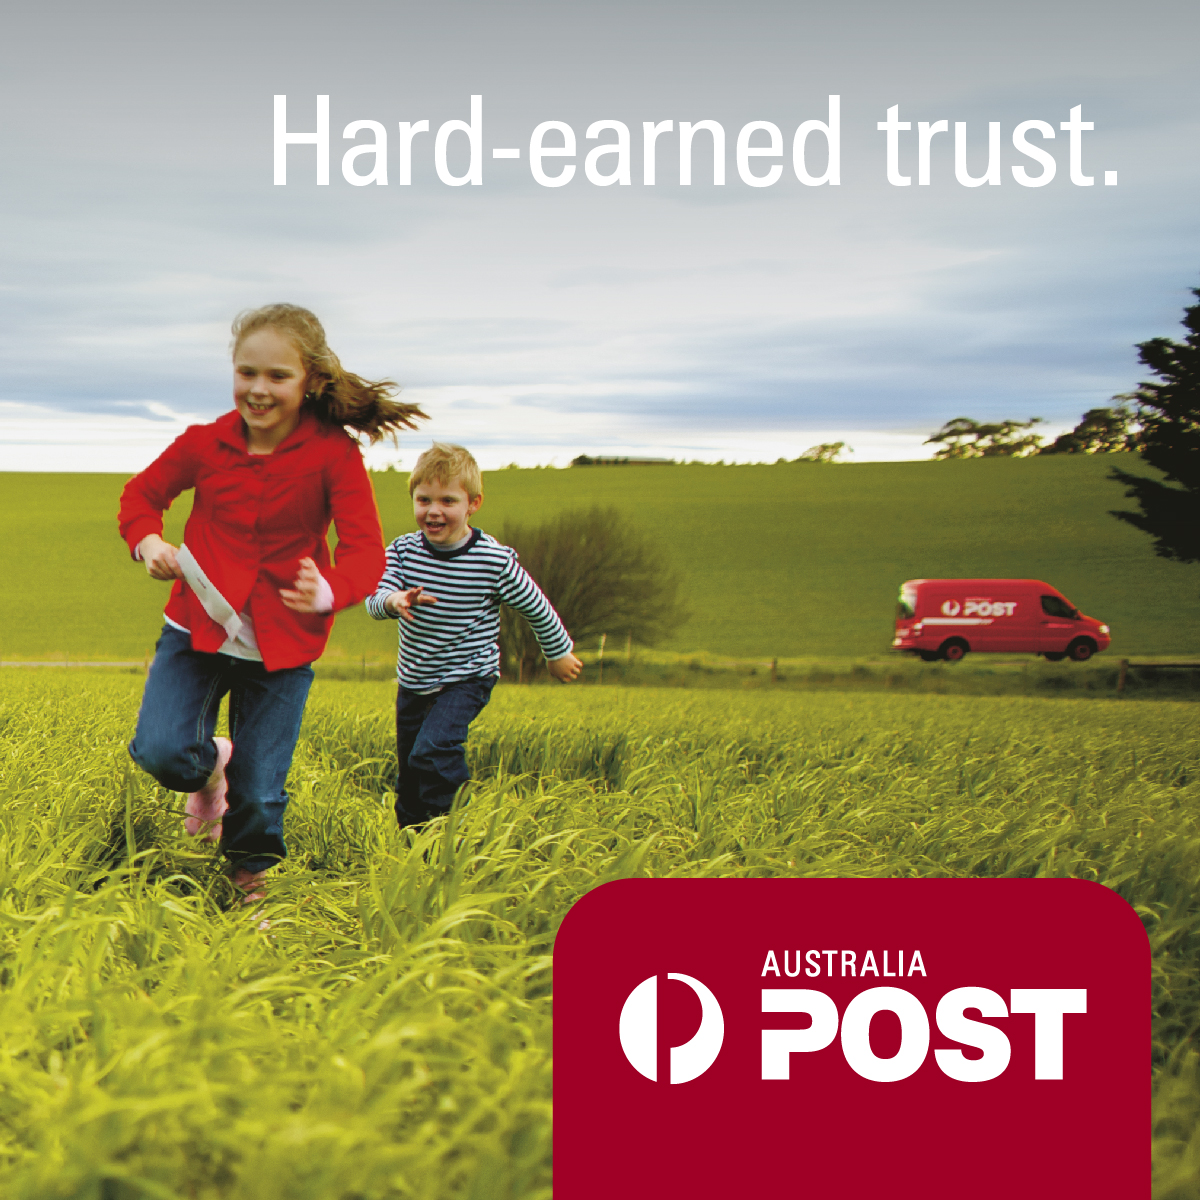 Australia Post Mail Delivery Service Corporate Identity Applications